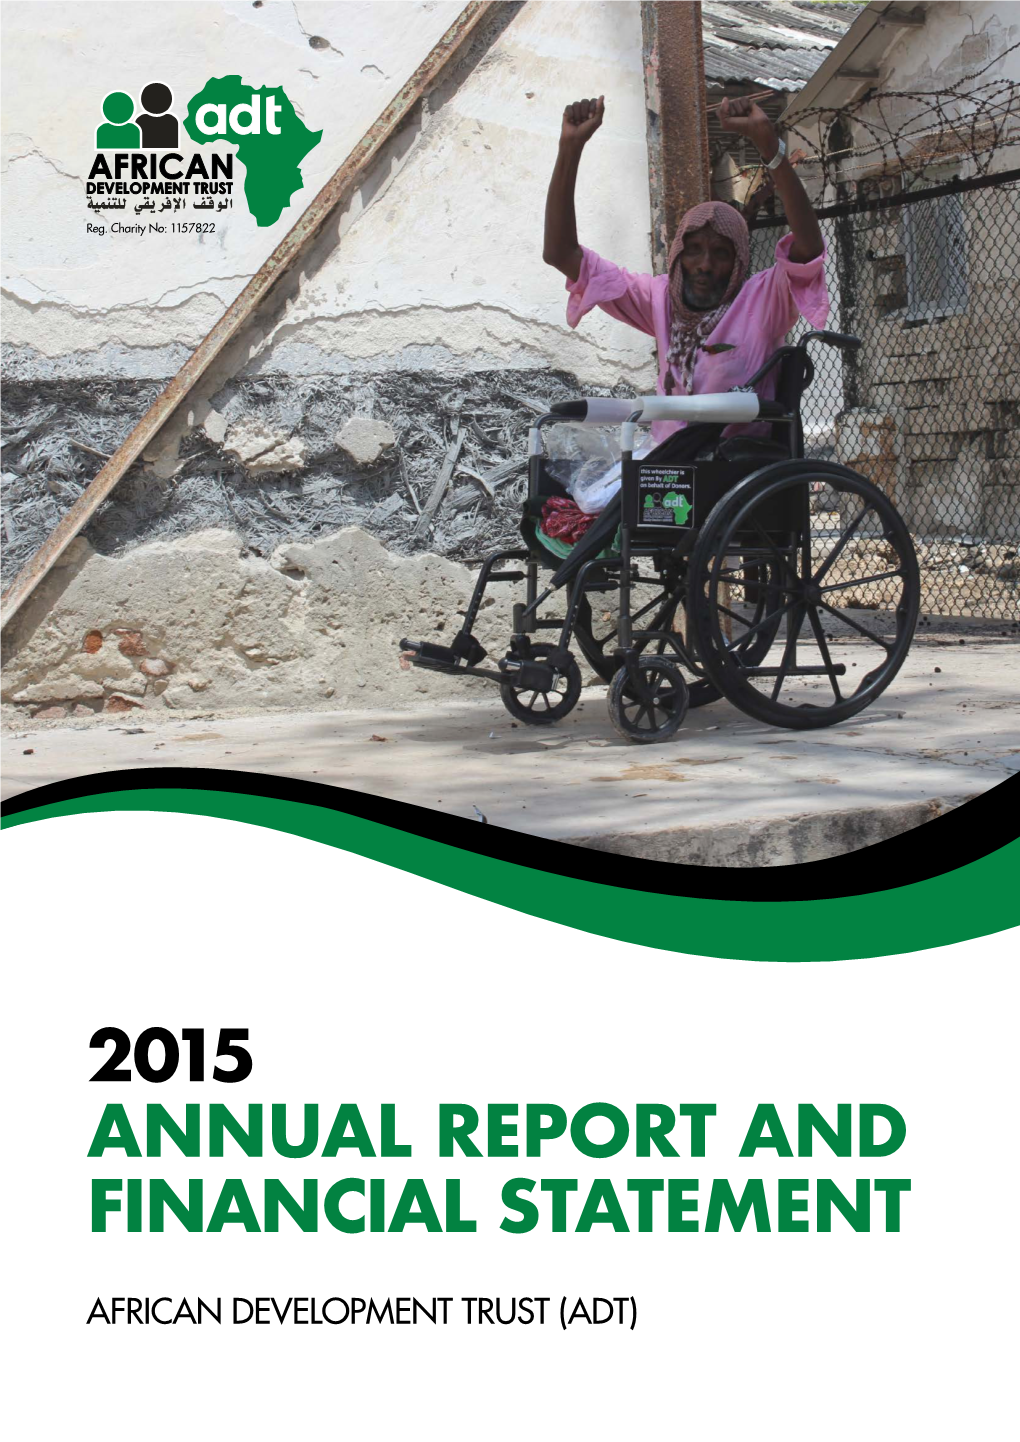 2015 Annual Report and Financial Statement